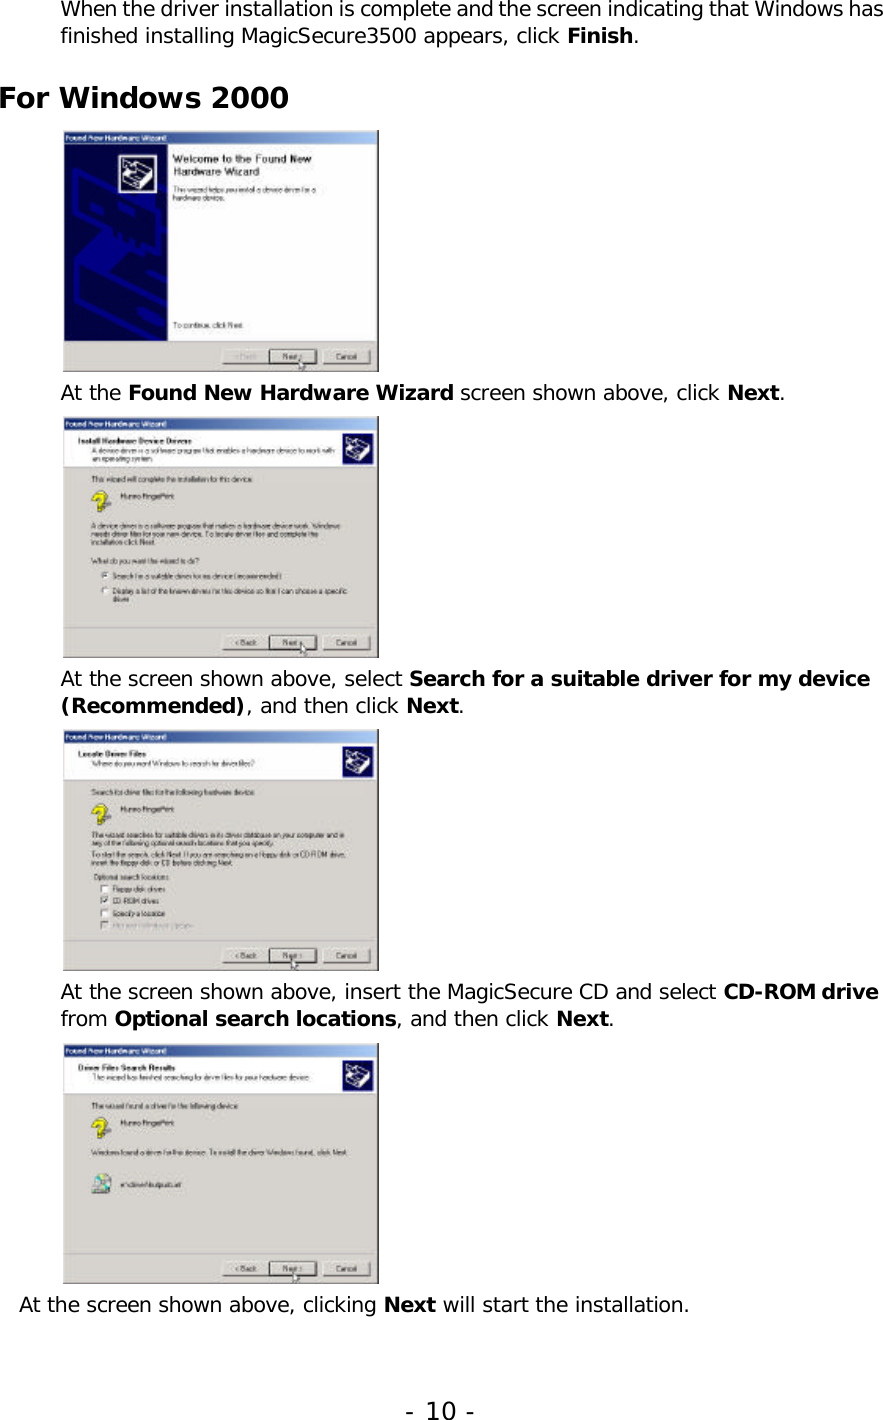 -10-WhenthedriverinstallationiscompleteandthescreenindicatingthatWindowshasfinishedinstallingMagicSecure3500appears,click Finish.ForWindows2000Atthe FoundNewHardwareWizard screenshownabove,click Next.Atthescreenshownabove,select Searchforasuitabledriverformydevice(Recommended),andthenclick Next.Atthescreenshownabove,inserttheMagicSecureCDandselect CD-ROMdrivefrom Optionalsearchlocations,andthenclick Next.Atthescreenshownabove,clicking Next willstarttheinstallation.